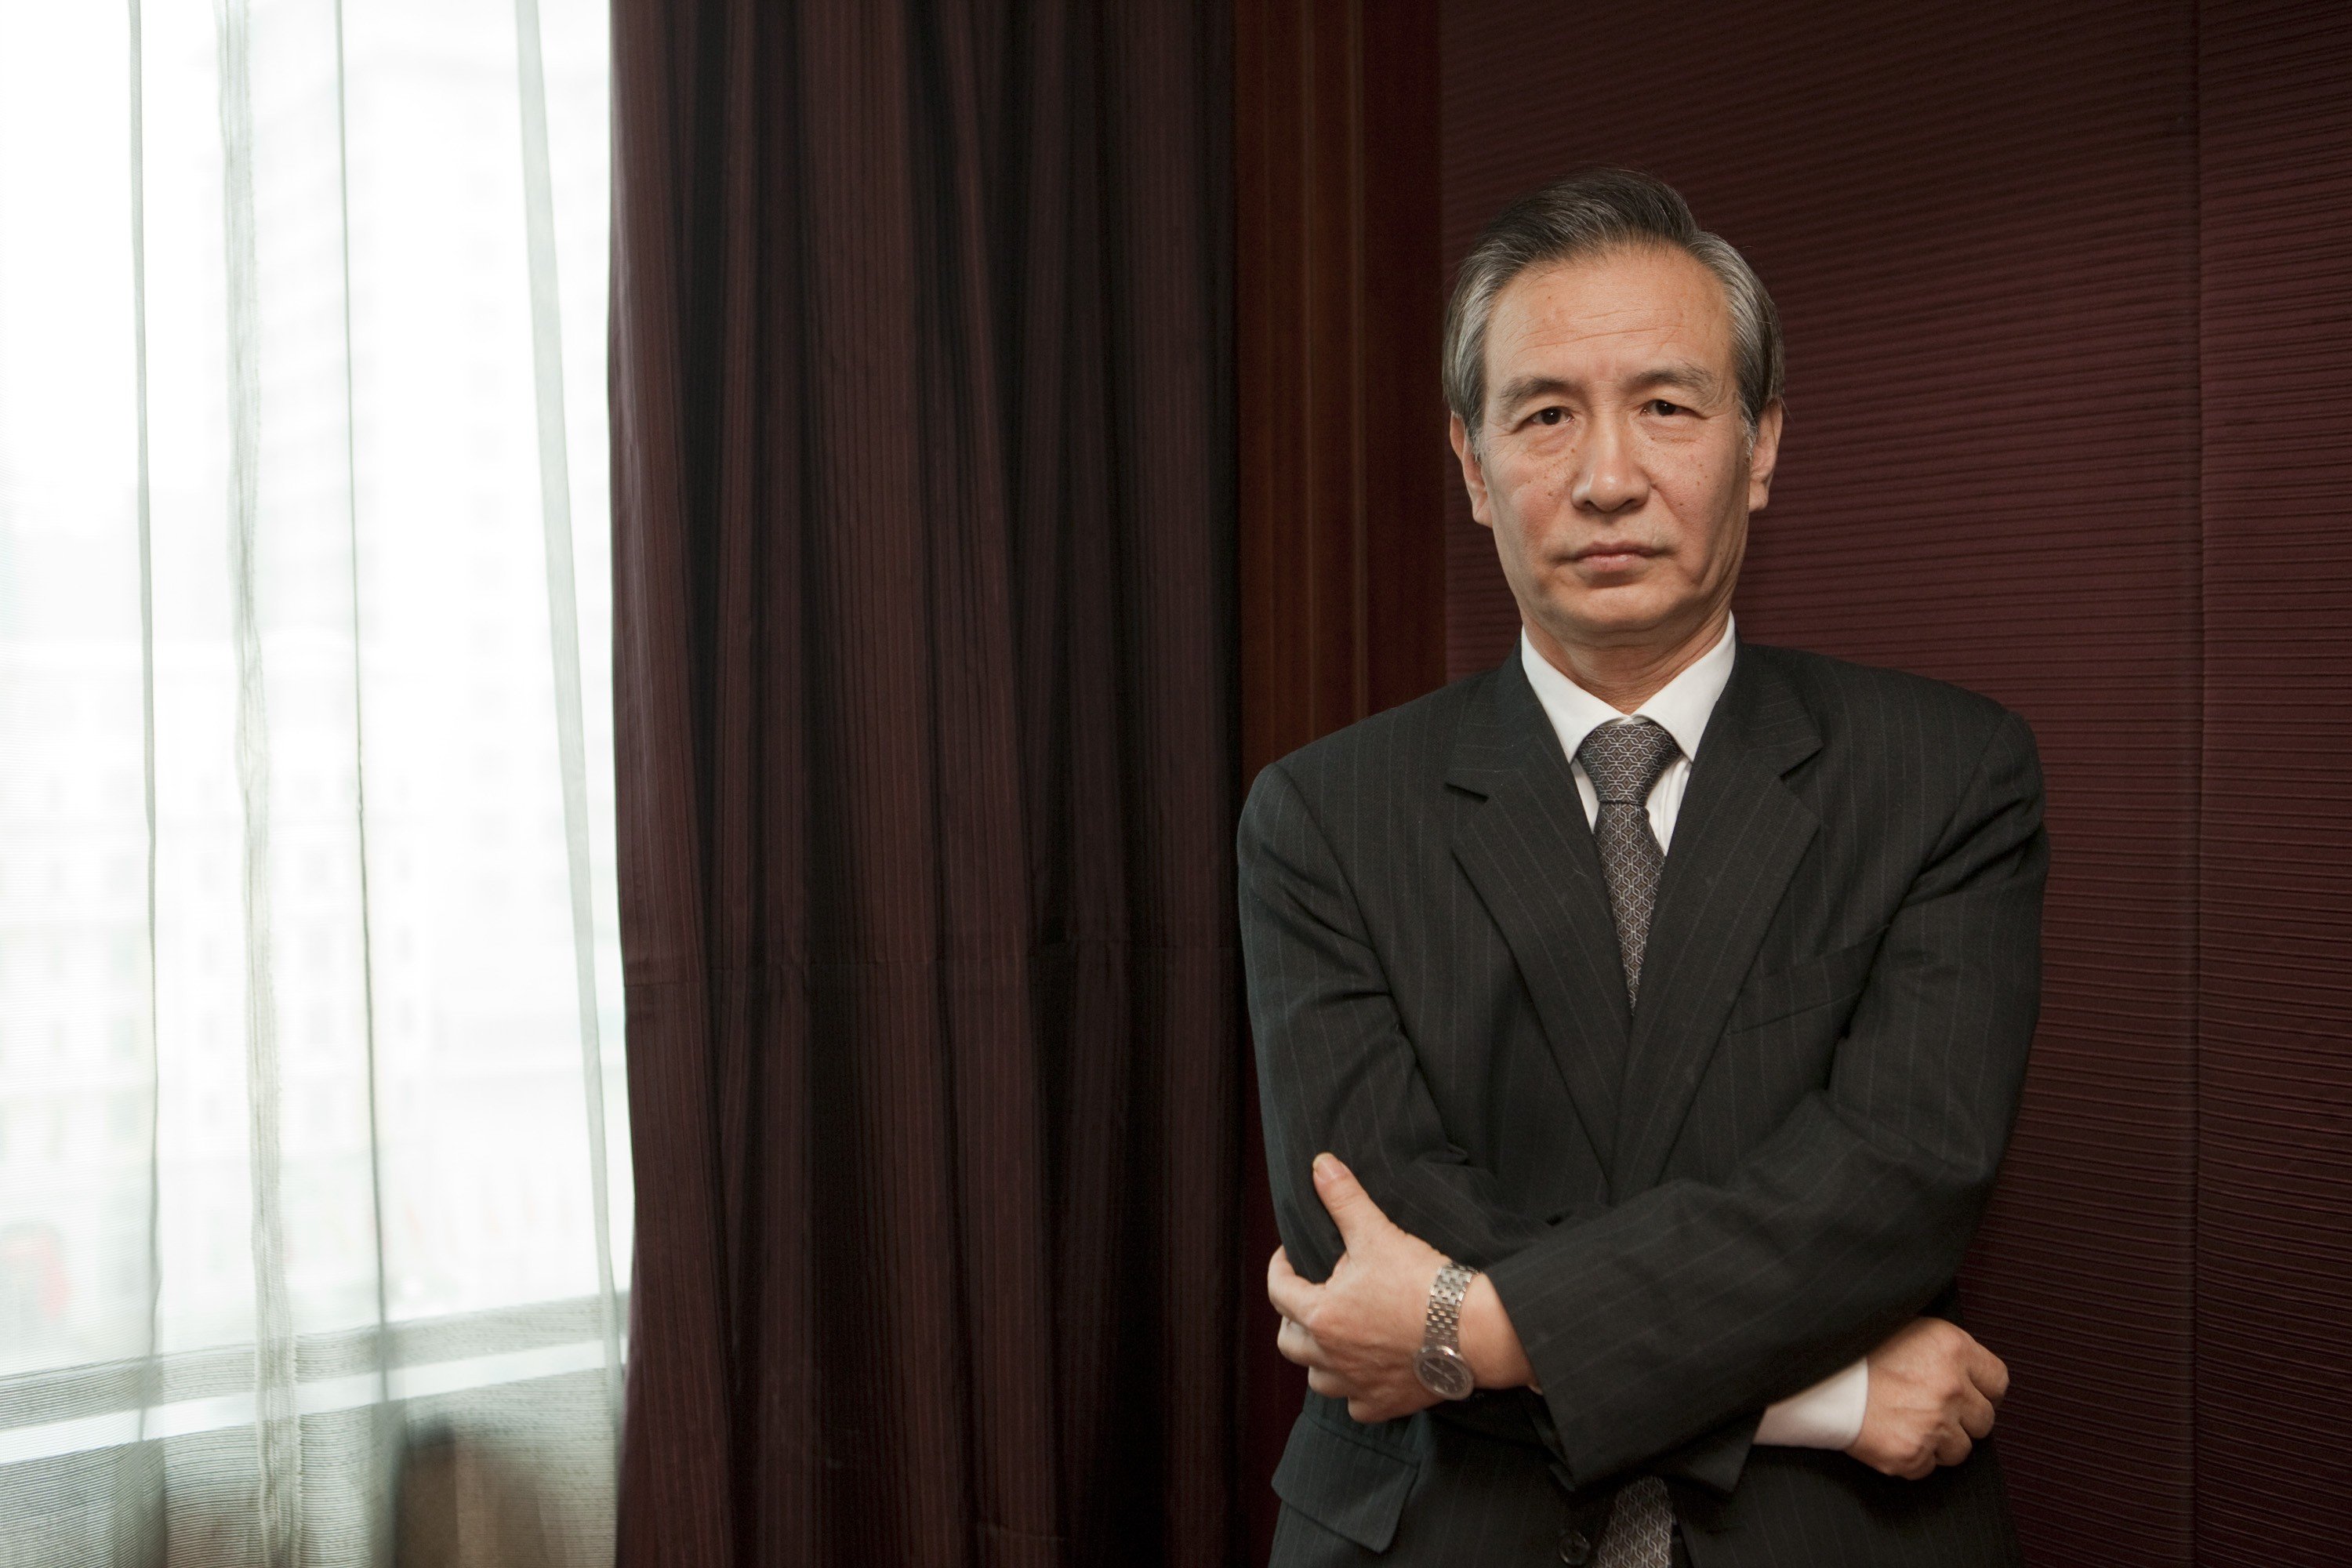 Liu He masterminded Xi Jinping’s supply side reforms. Photo: Bloomberg